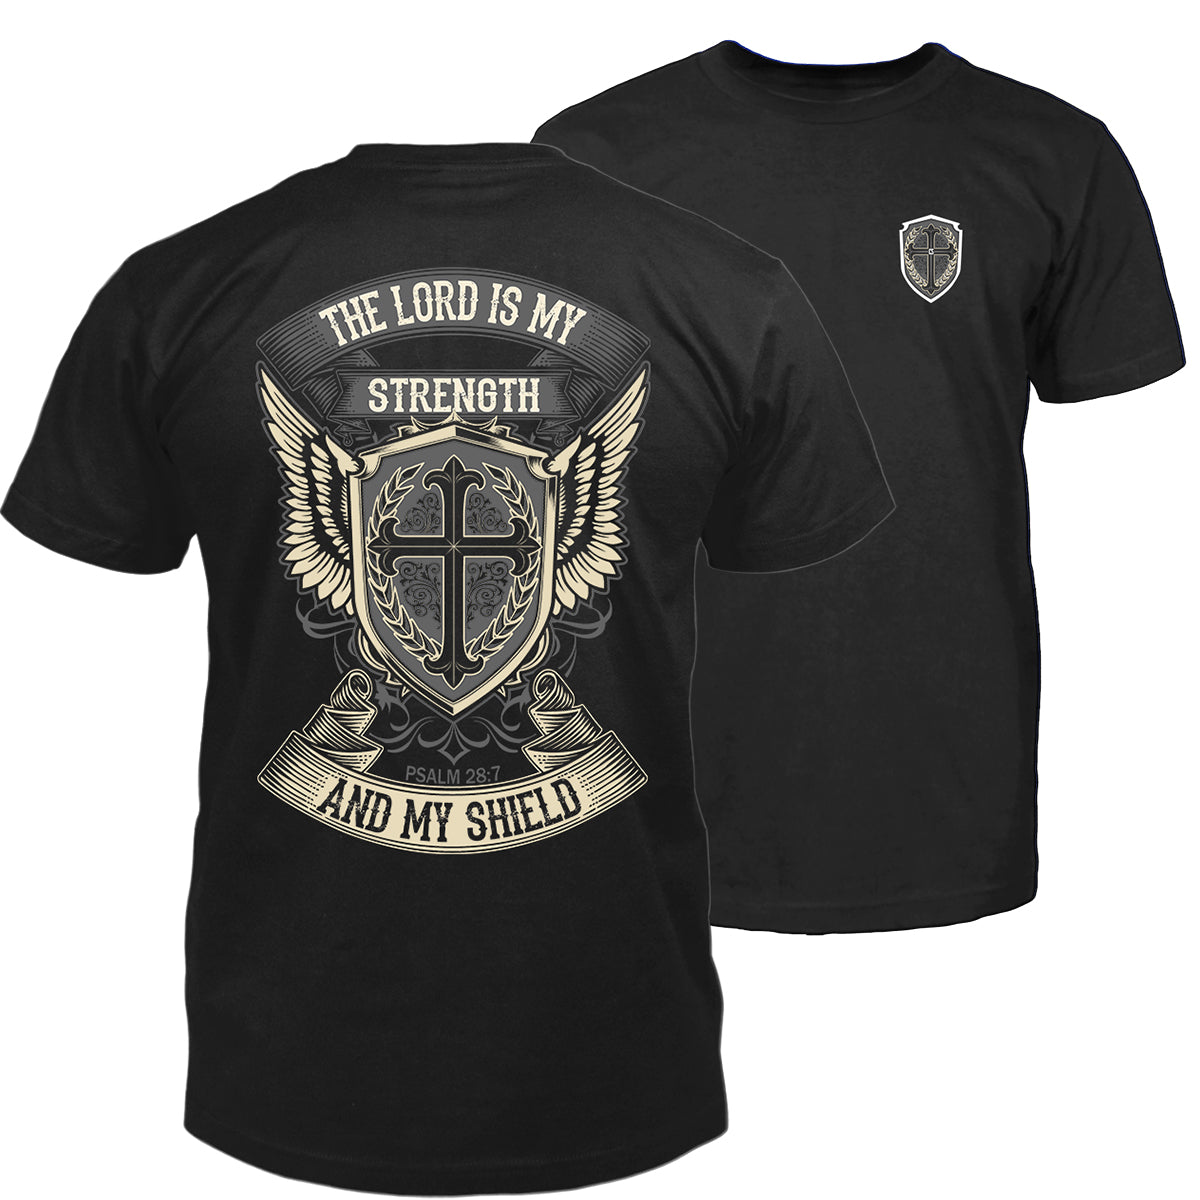 My Strength and My Shield T-Shirt